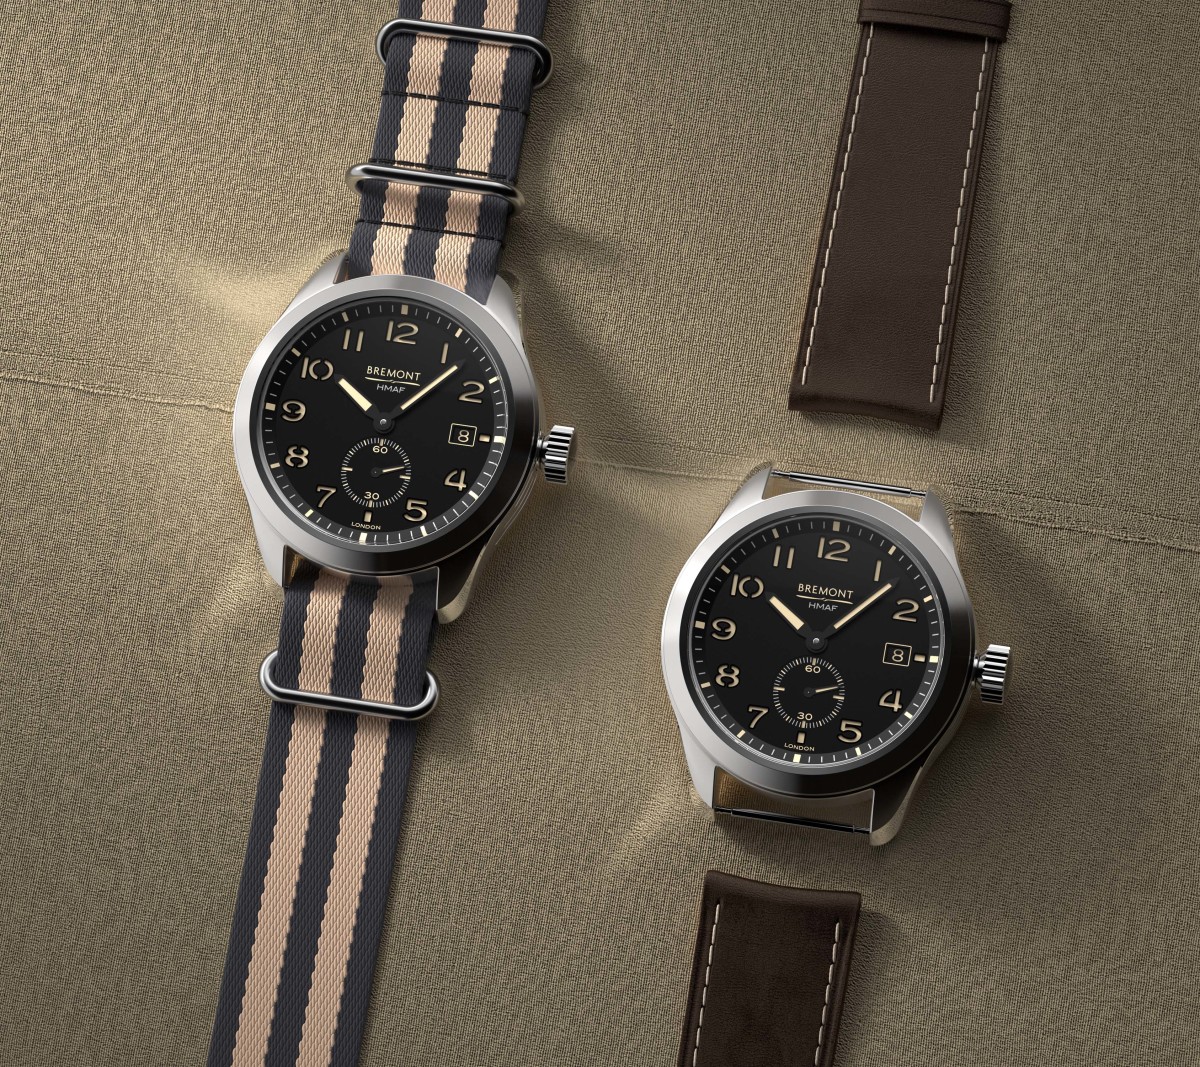 Bremont releases a new Broadsword watch inspired by the Dirty Dozen ...